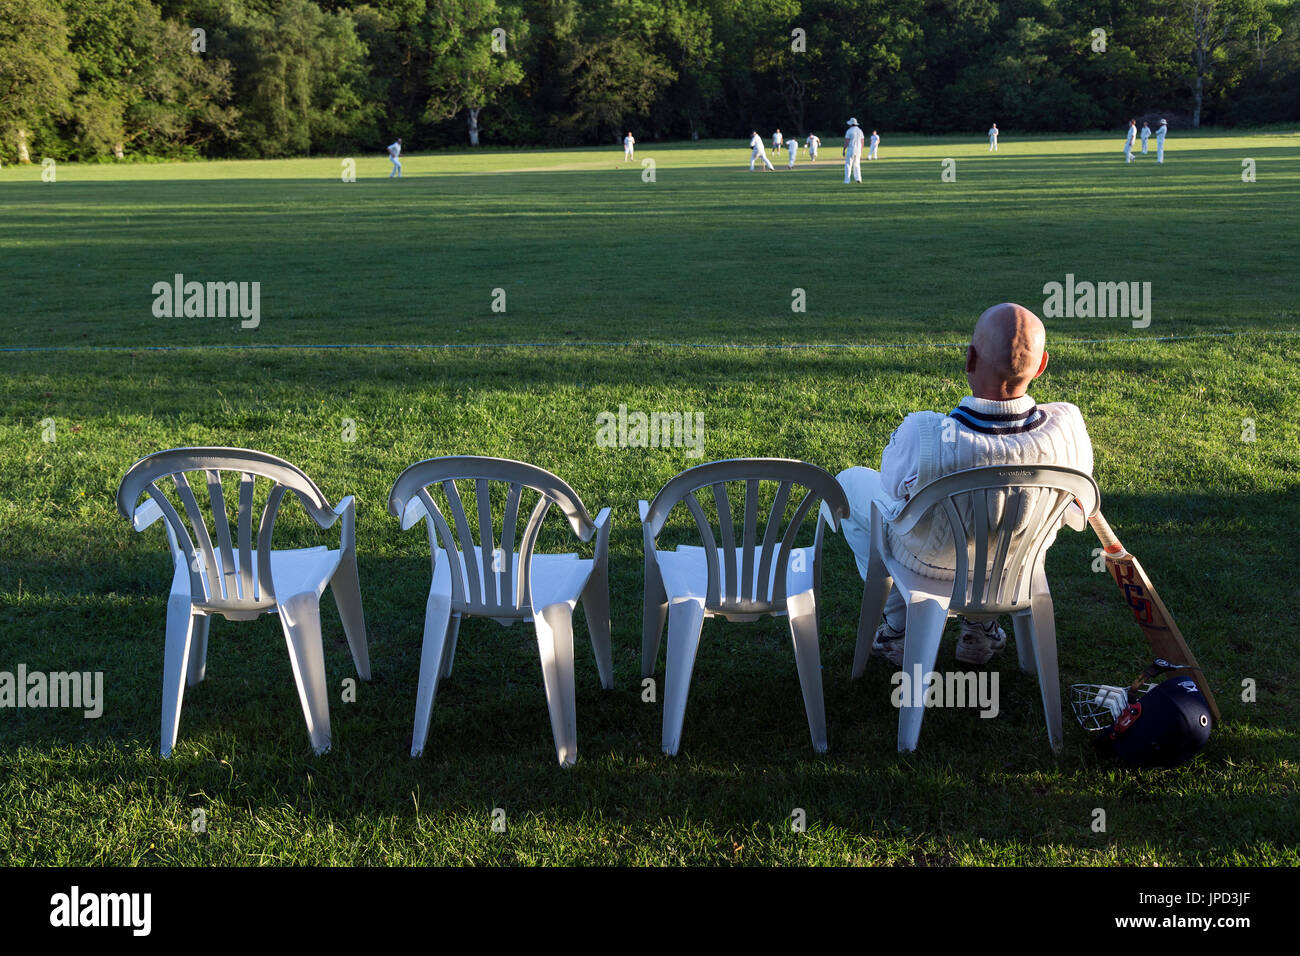 Village cricket is a term,english,village life,playing of cricket in rural villages in England,All The Gear, No idea,time out,12th man cricket Stock Photo